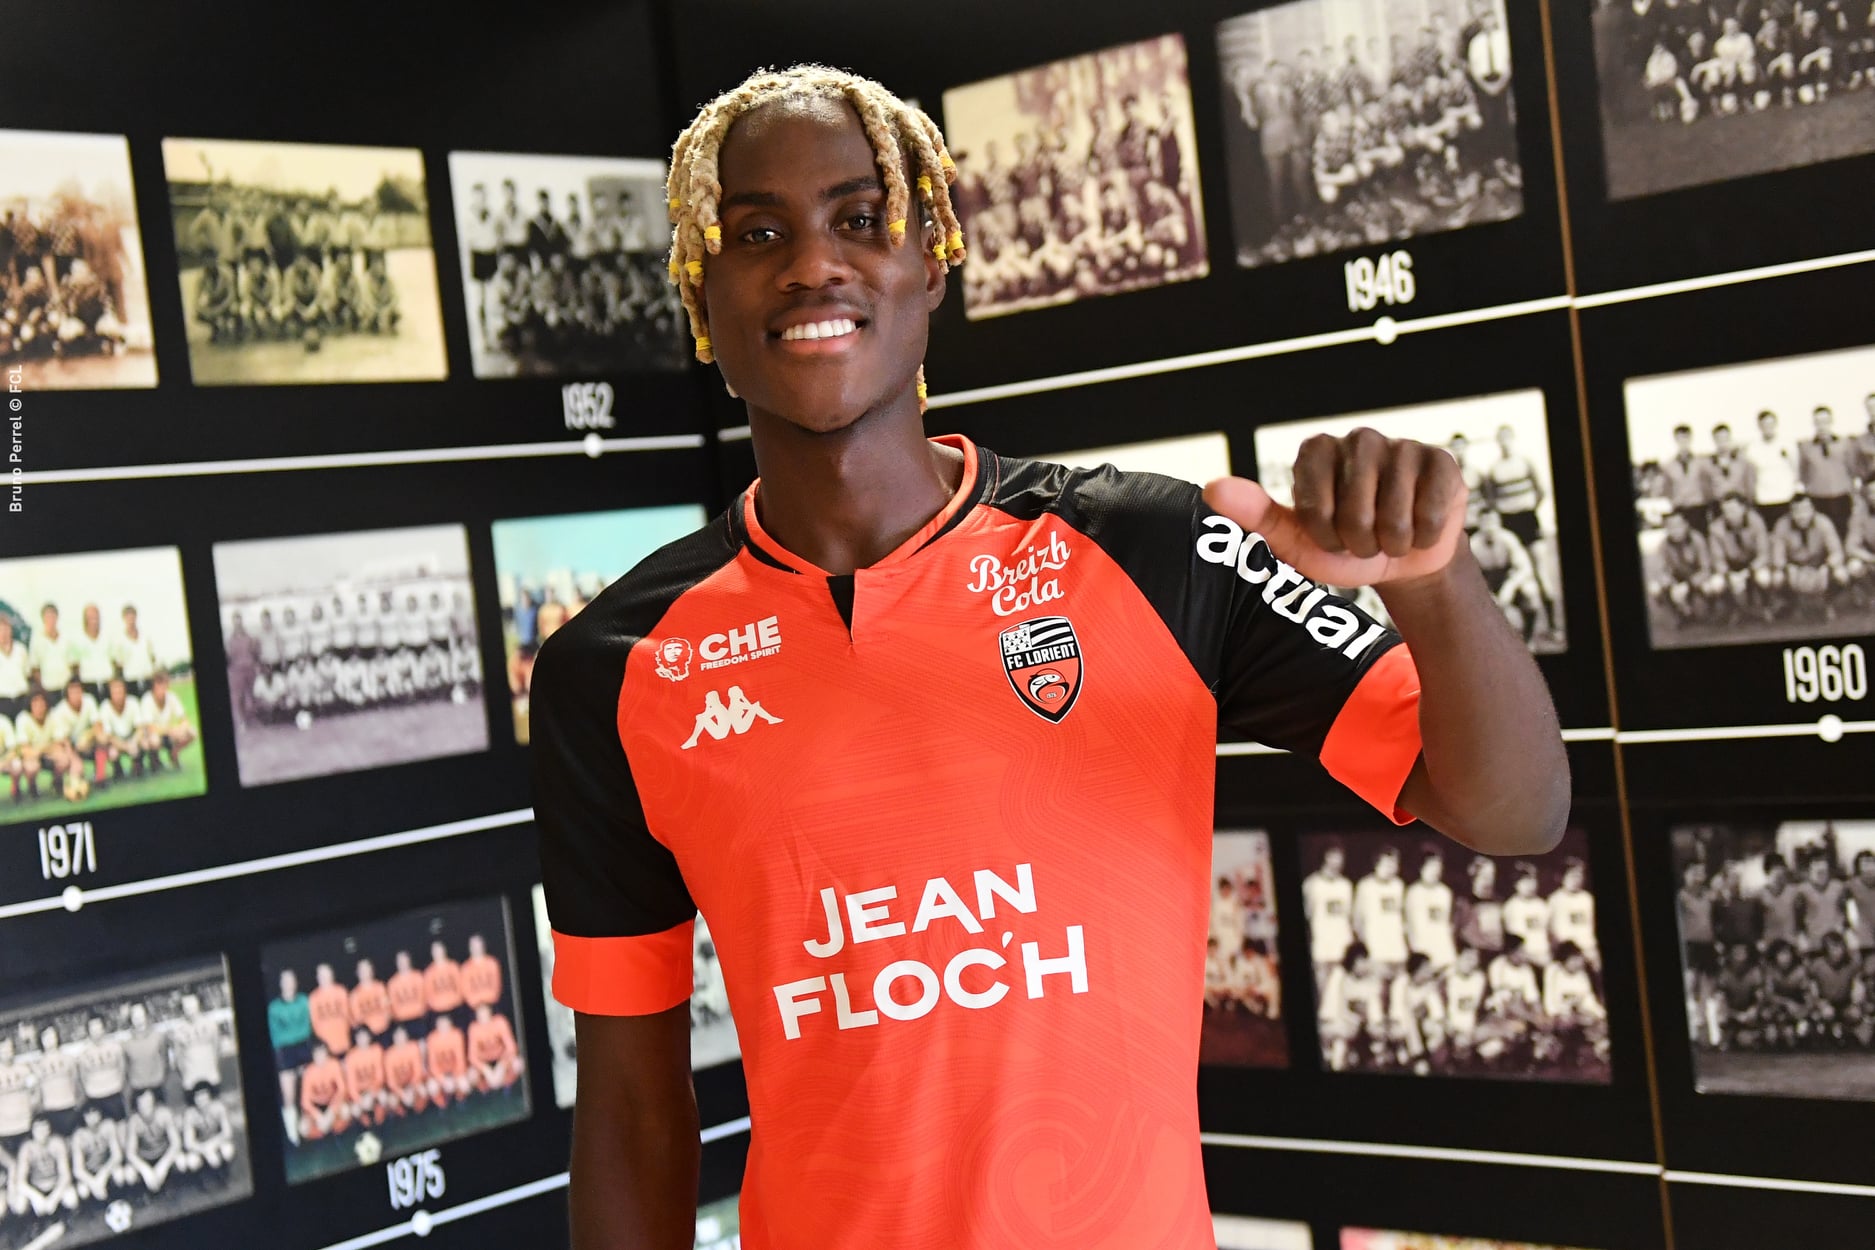 Sierra Leone-born Trevoh Chalobah joins French side Lorient